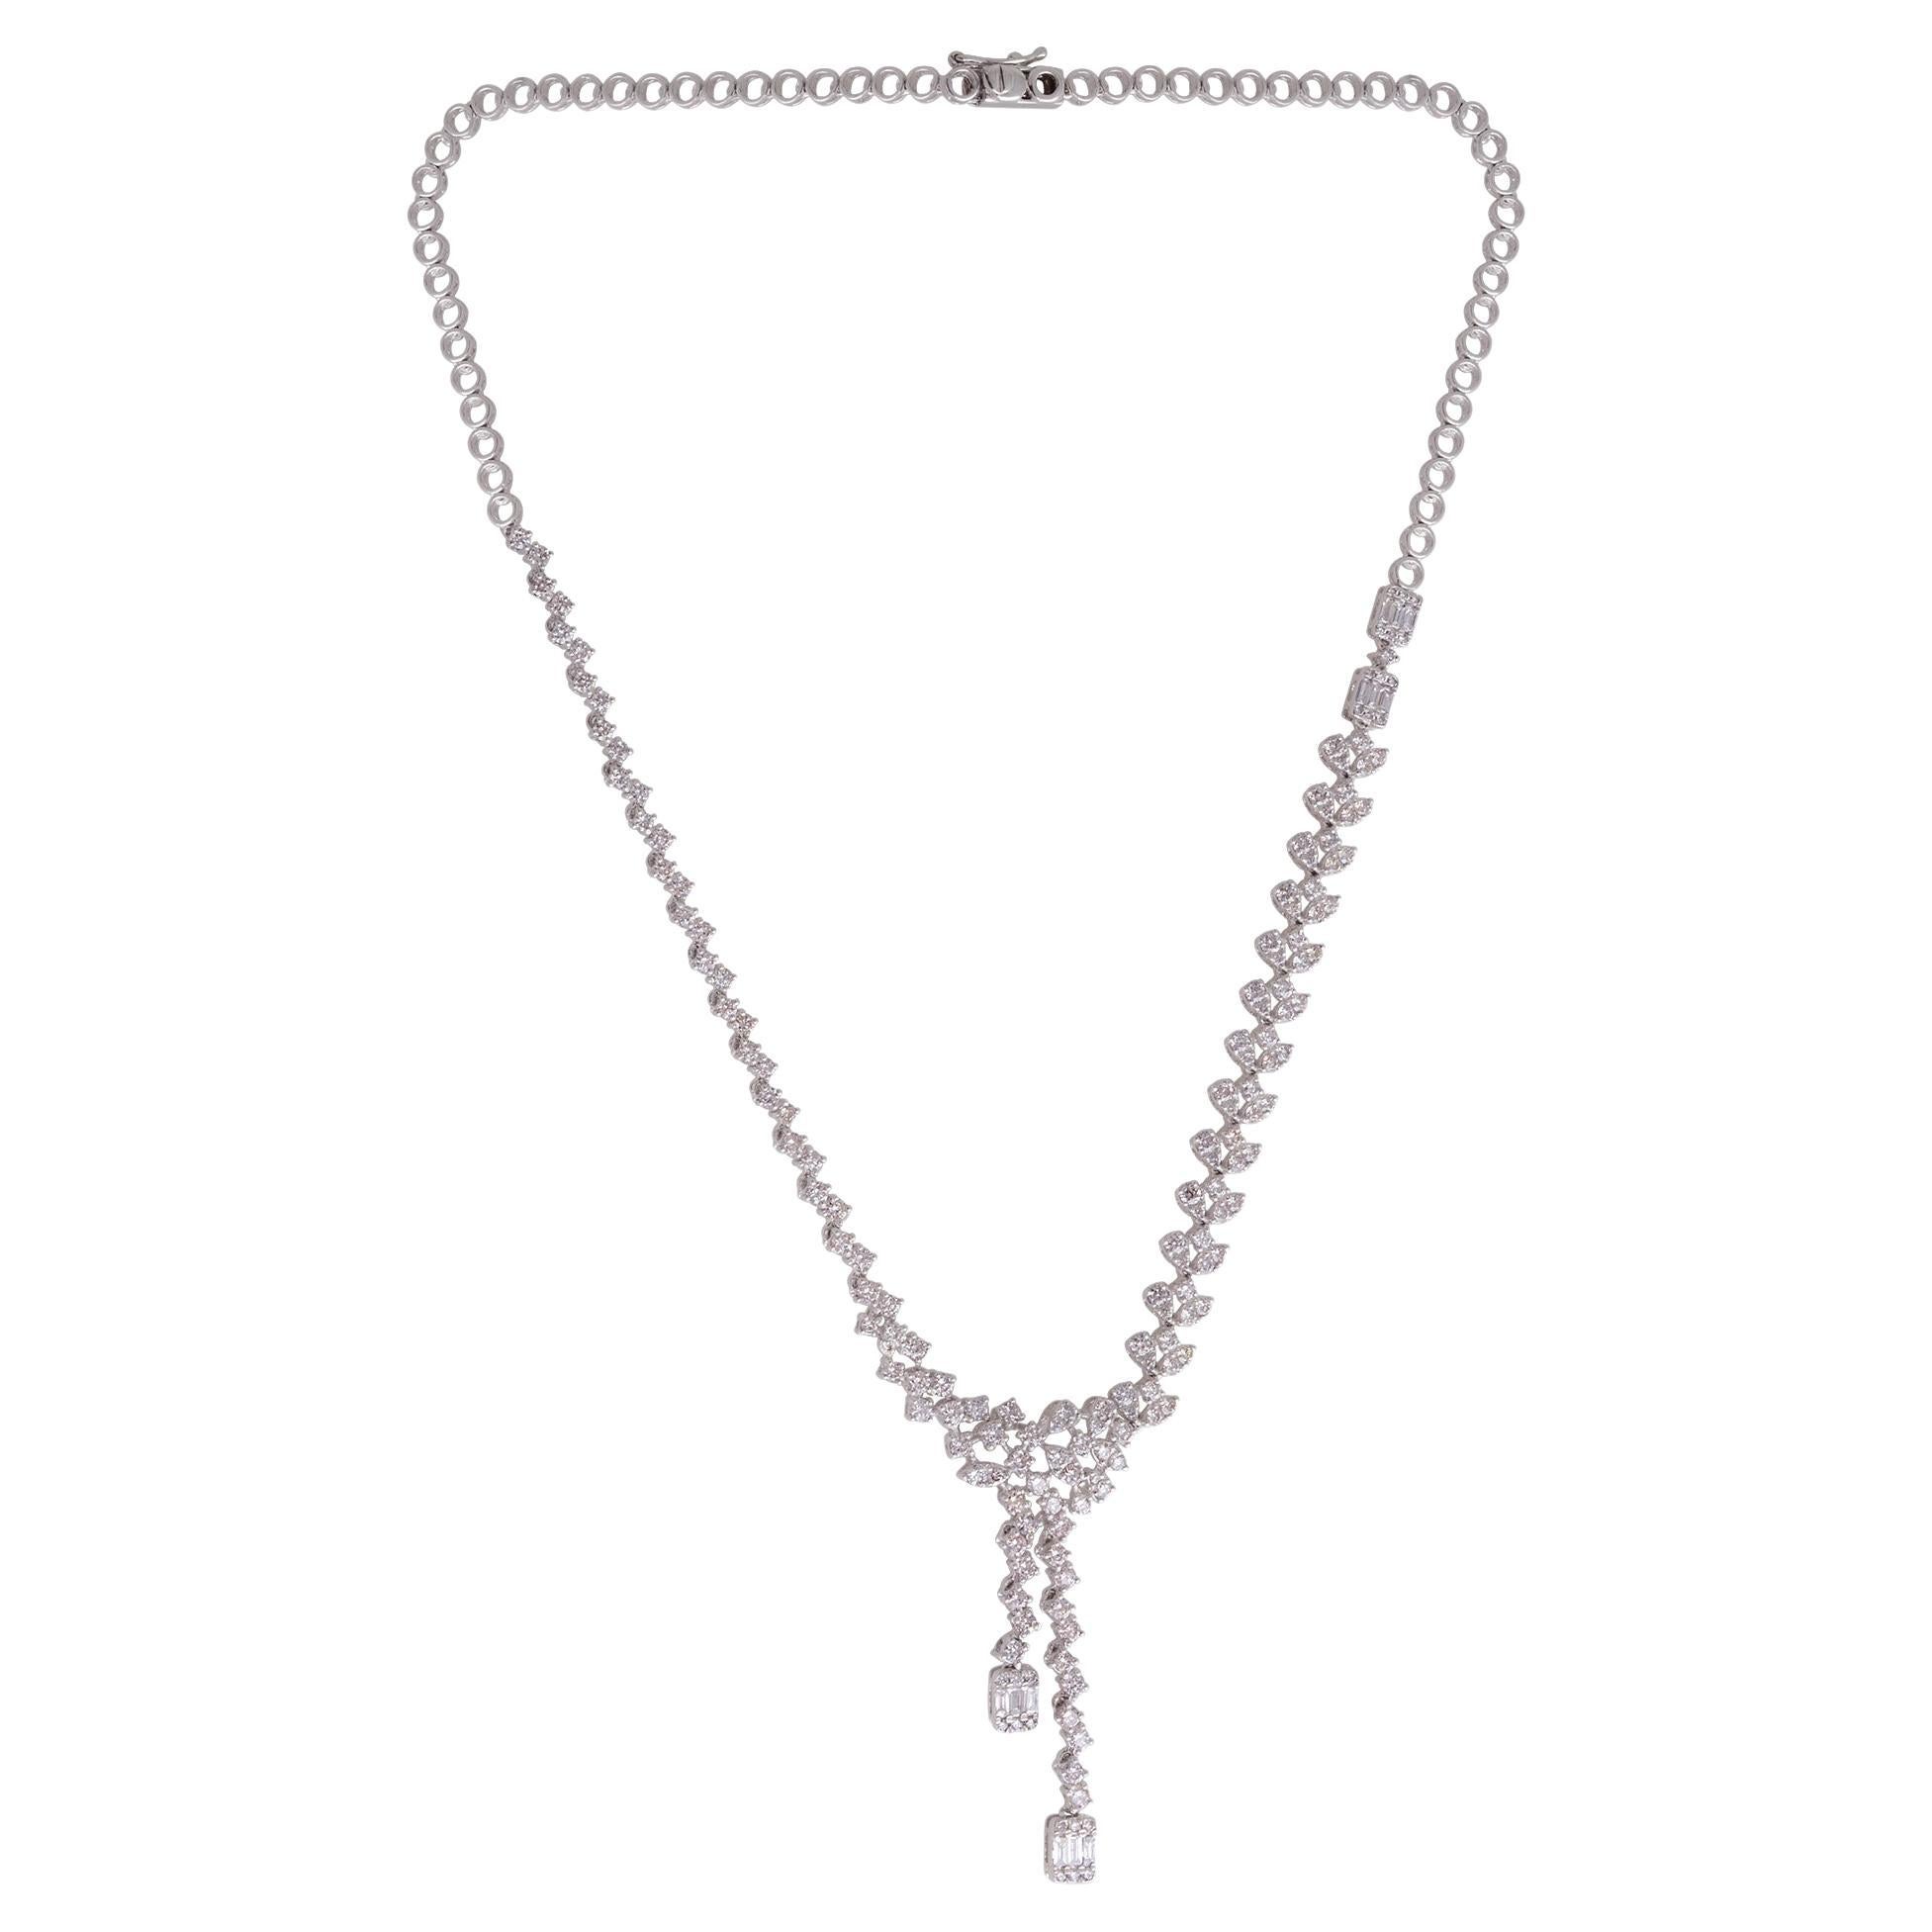 Natural 5.80 Carat Baguette Diamond Lariat Necklace Solid 14k White Gold Jewelry